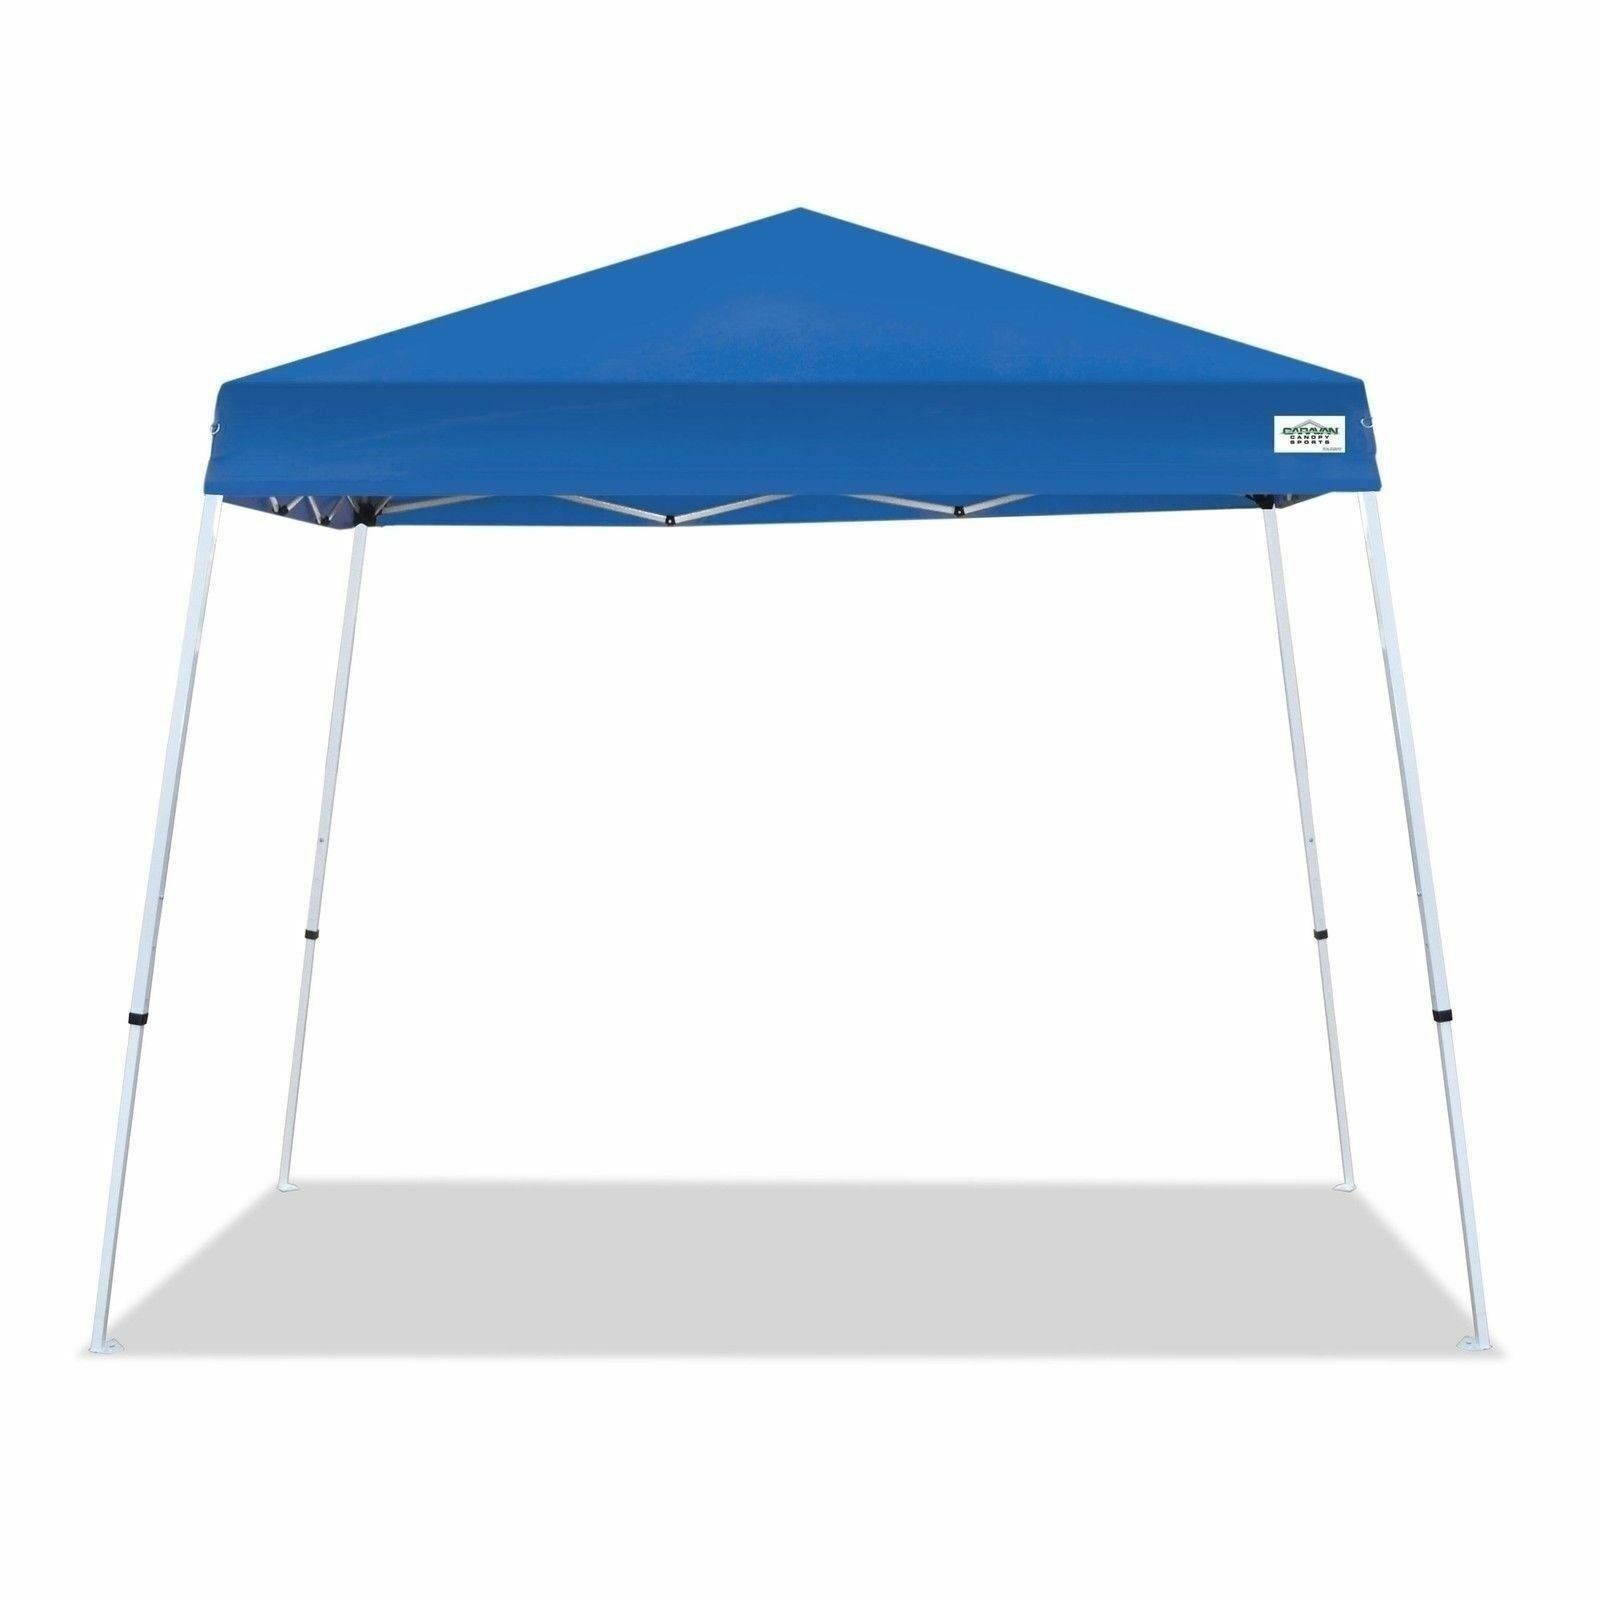 Primary image for Blue 12x12 Outdoor Portable Canopy Tent Shelter Sun Shade Camping Beach Picnic